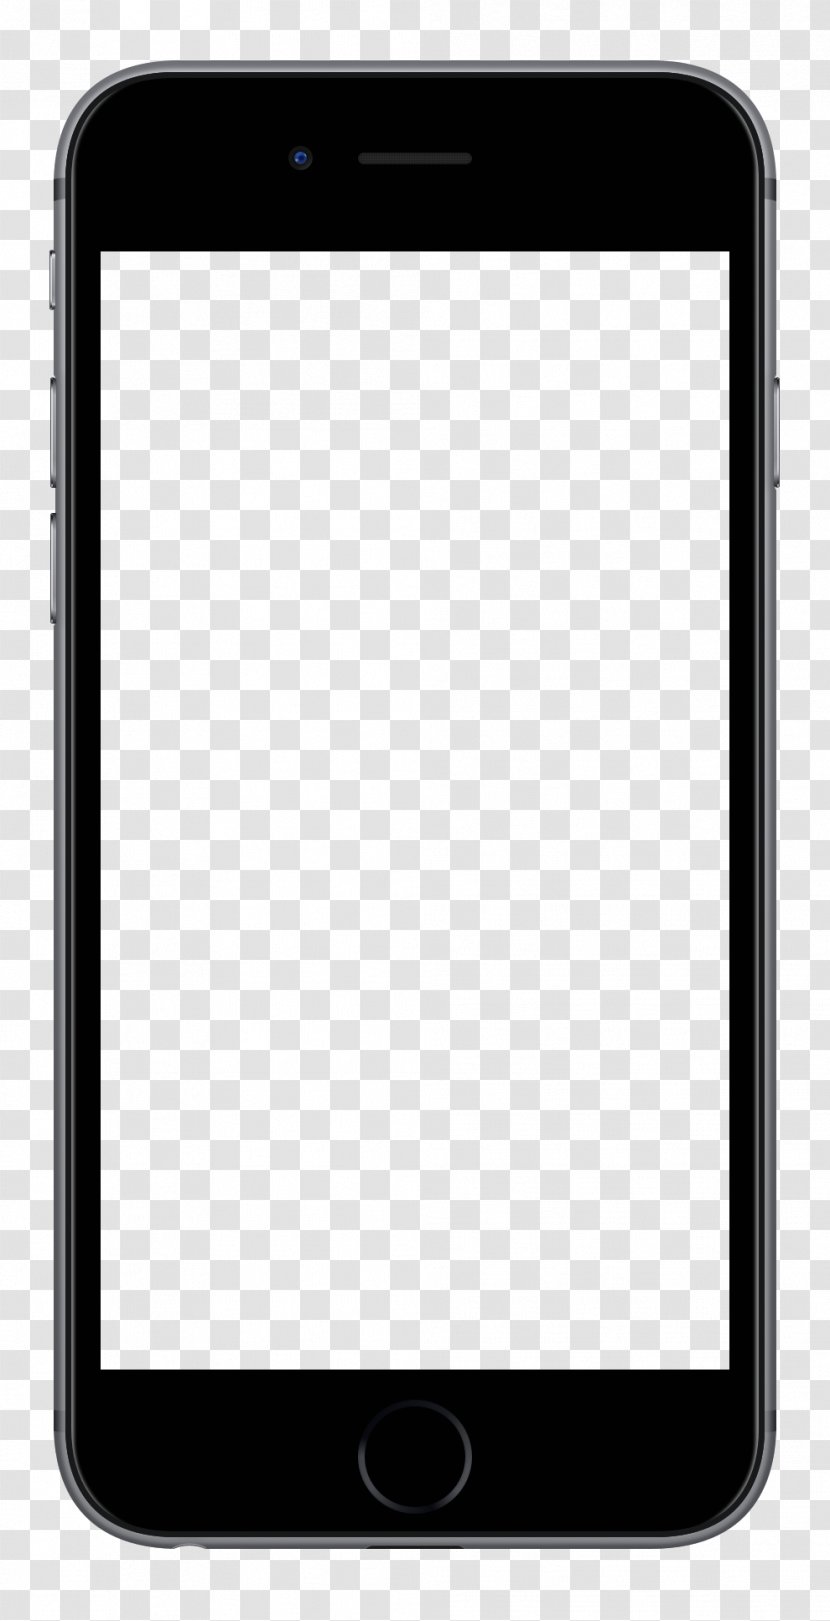 IPhone 5s 4S 7 - Telephone - Mobile App Transparent PNG